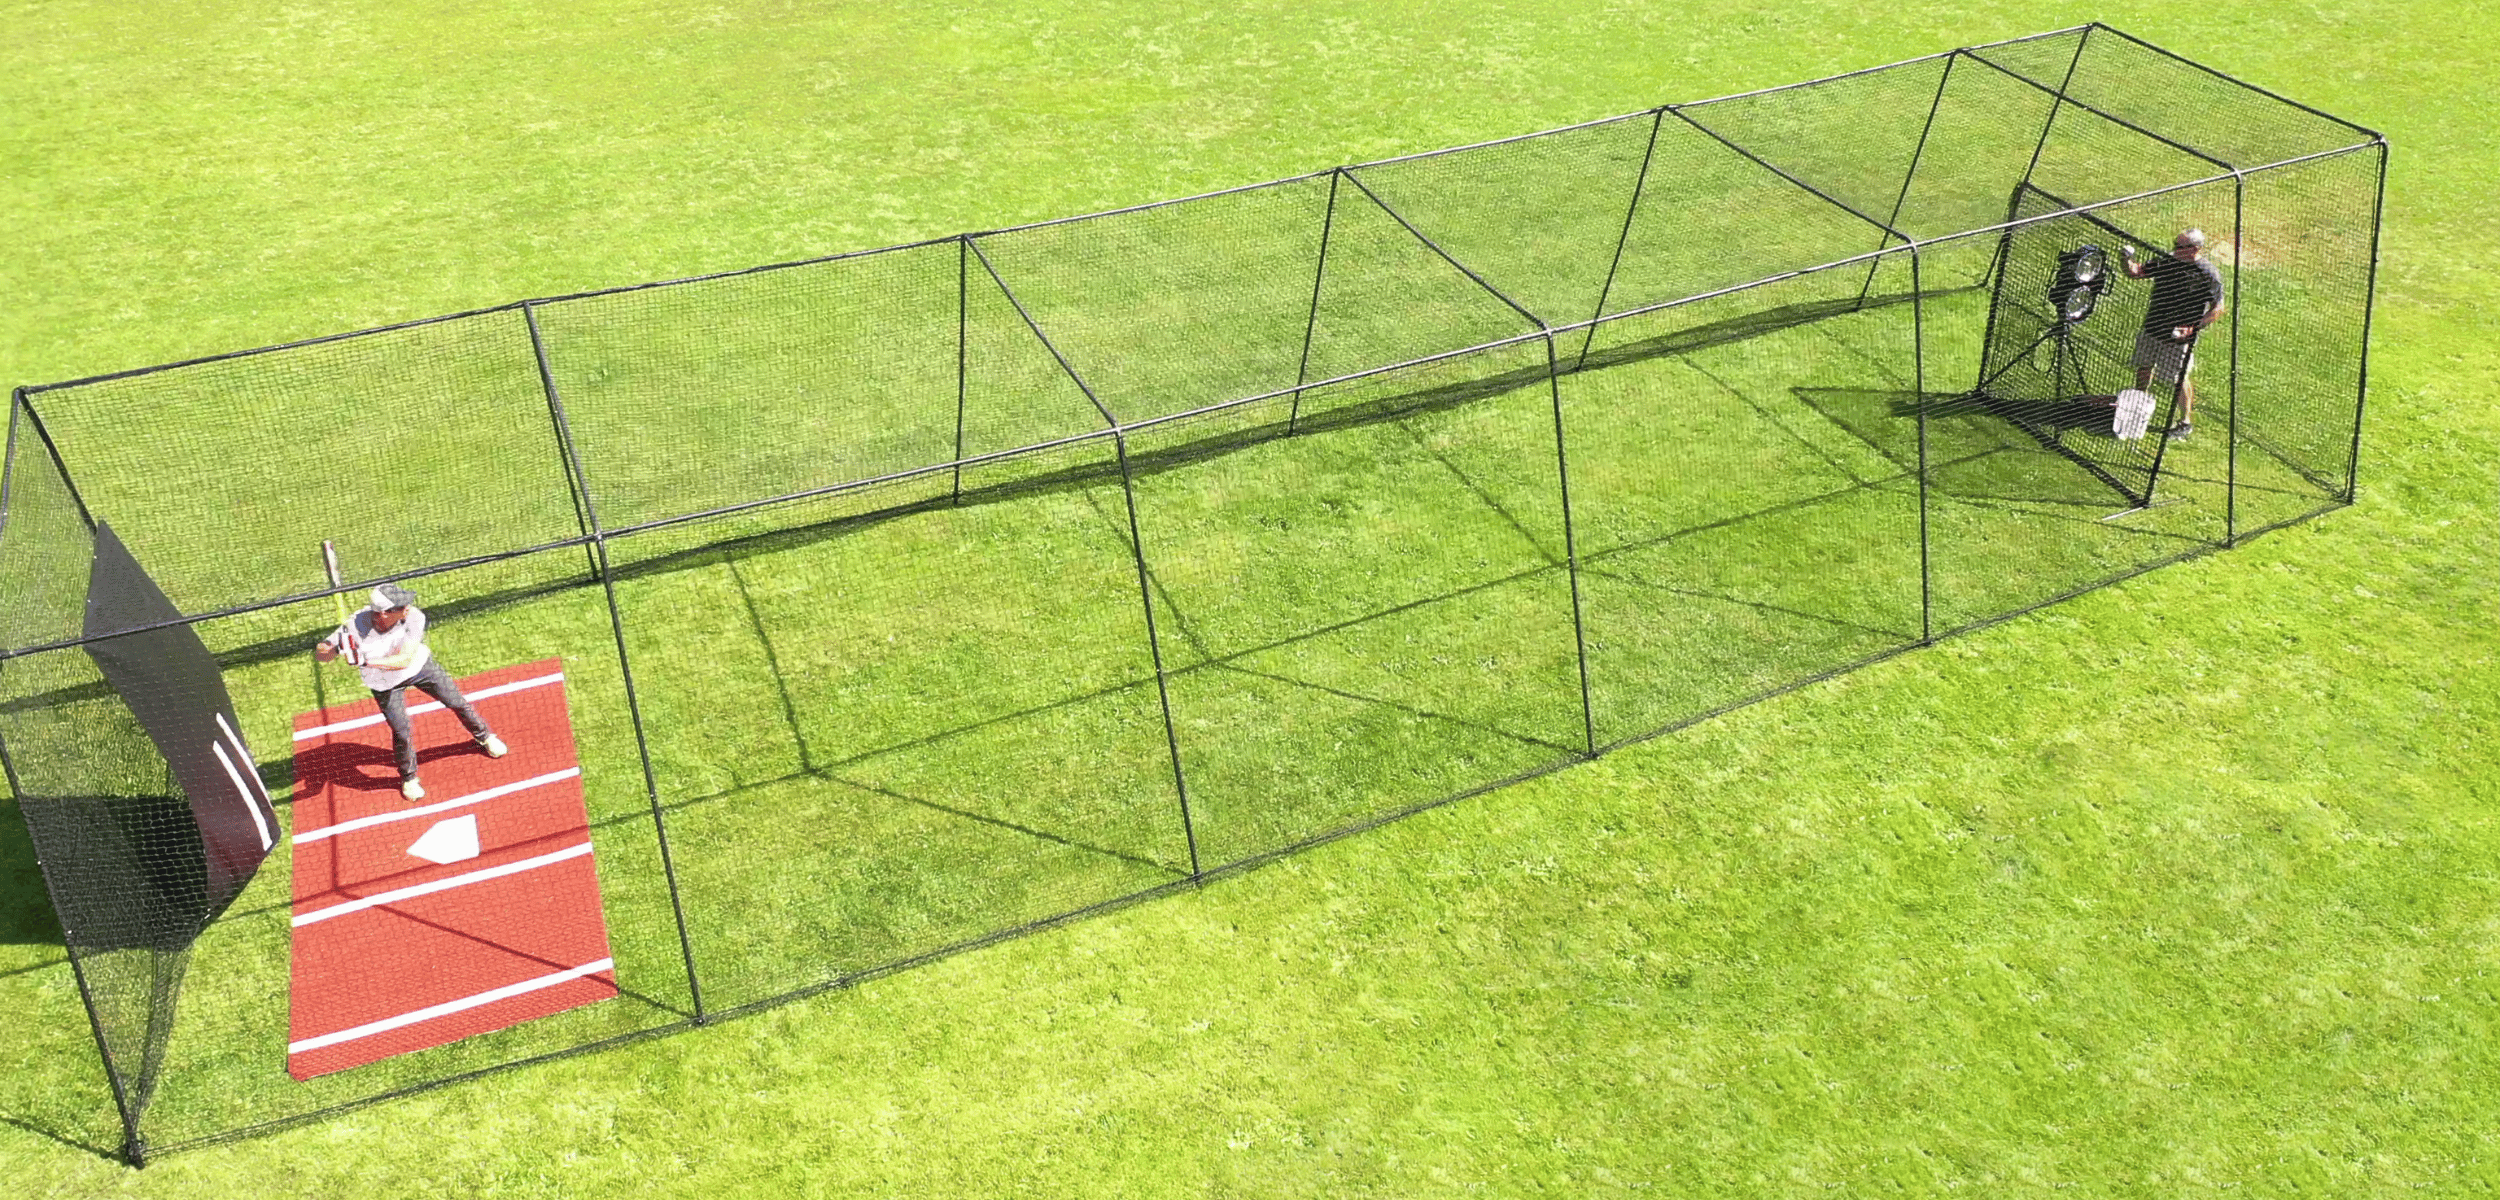 Man batting in Trapezoid batting cage with mat, backdrop, and pitching machinel